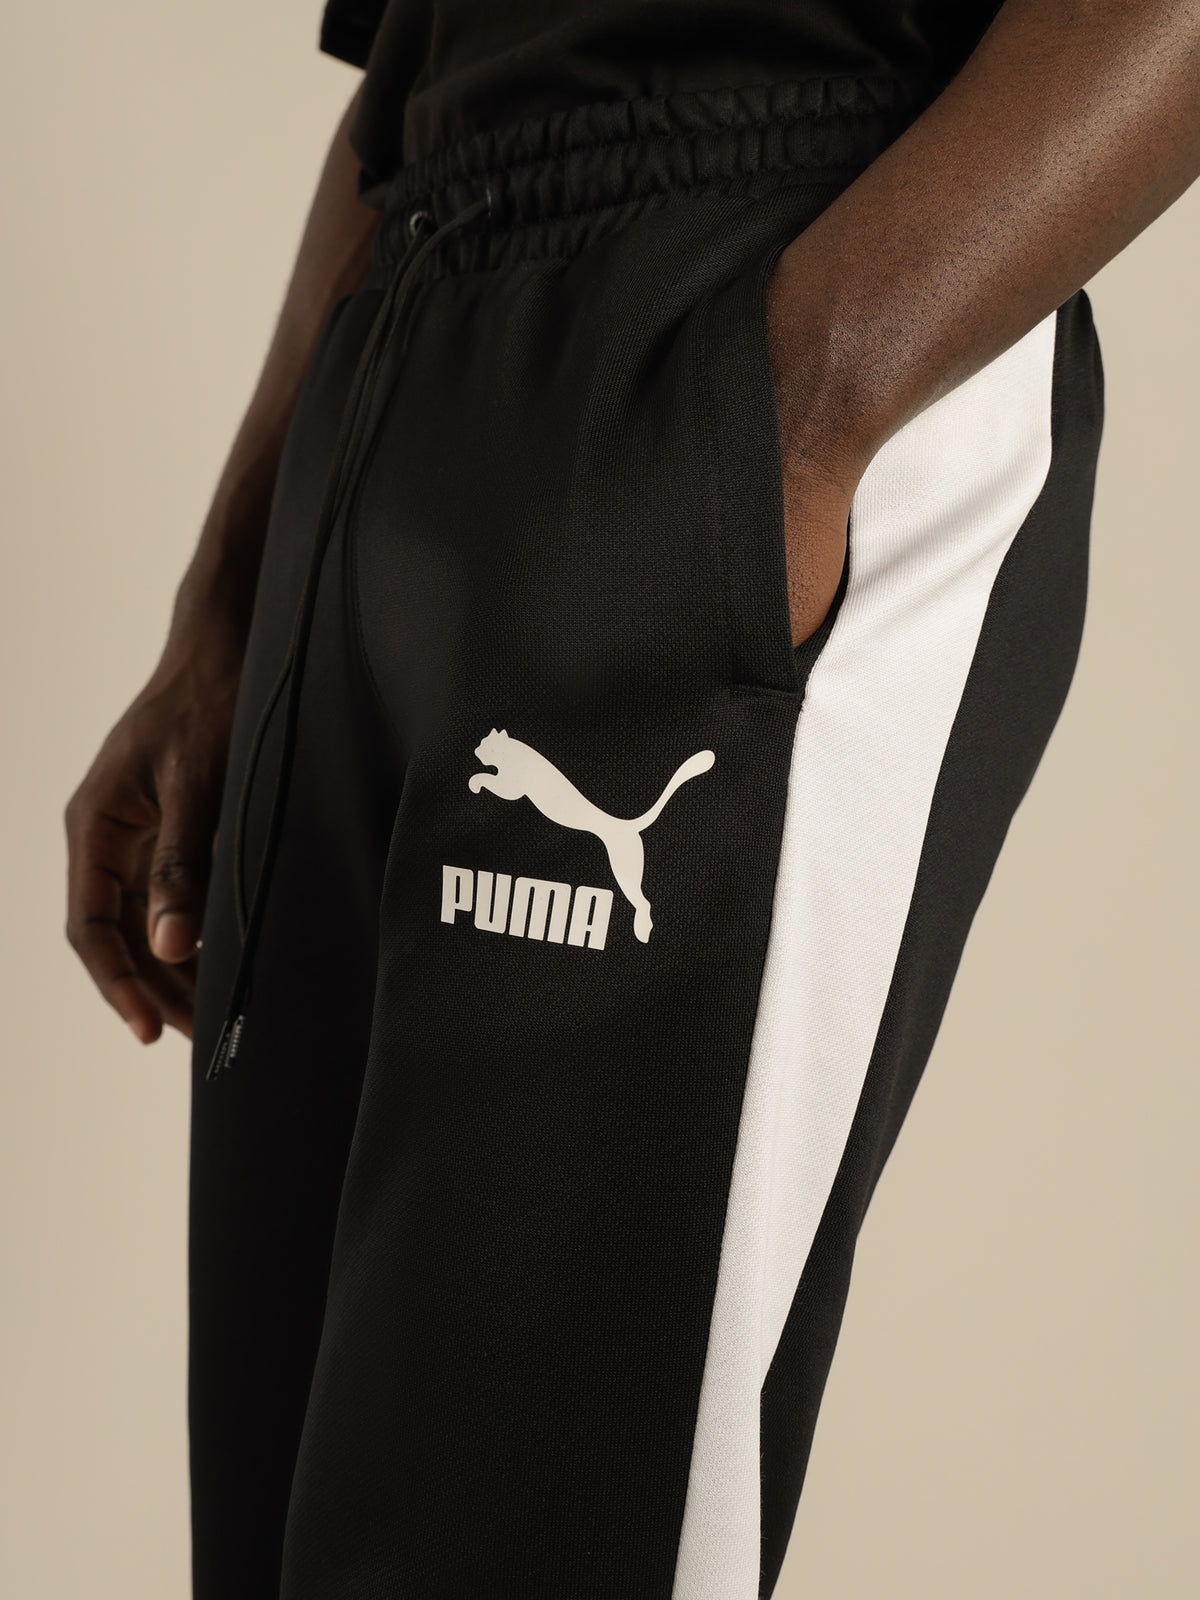 Iconic T7 Track Pants in Black